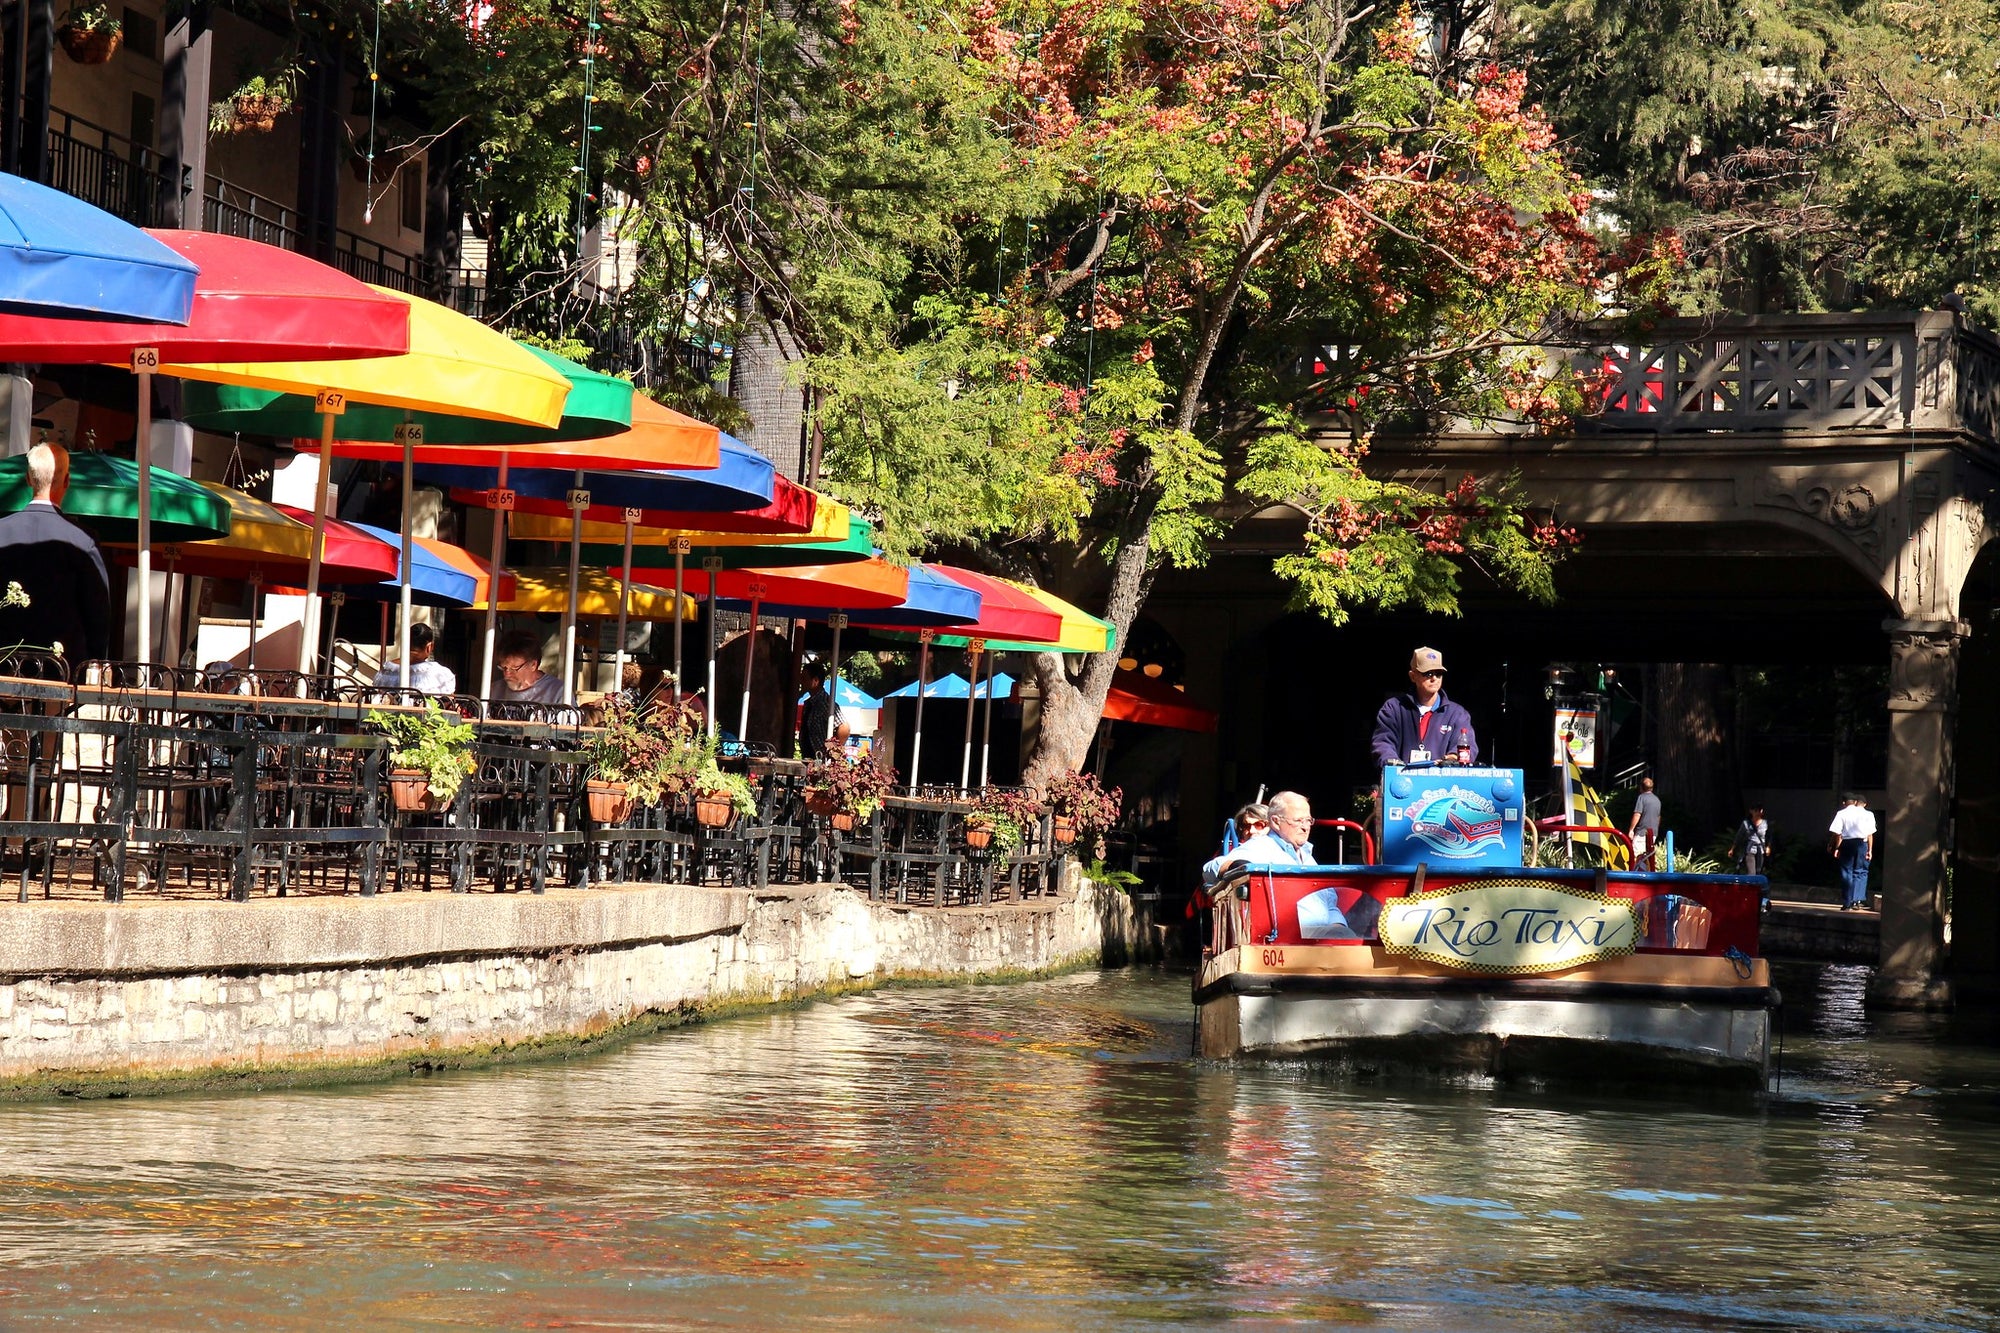 San Antonio Conventions and Tourism: Exploring the Heart of Texas